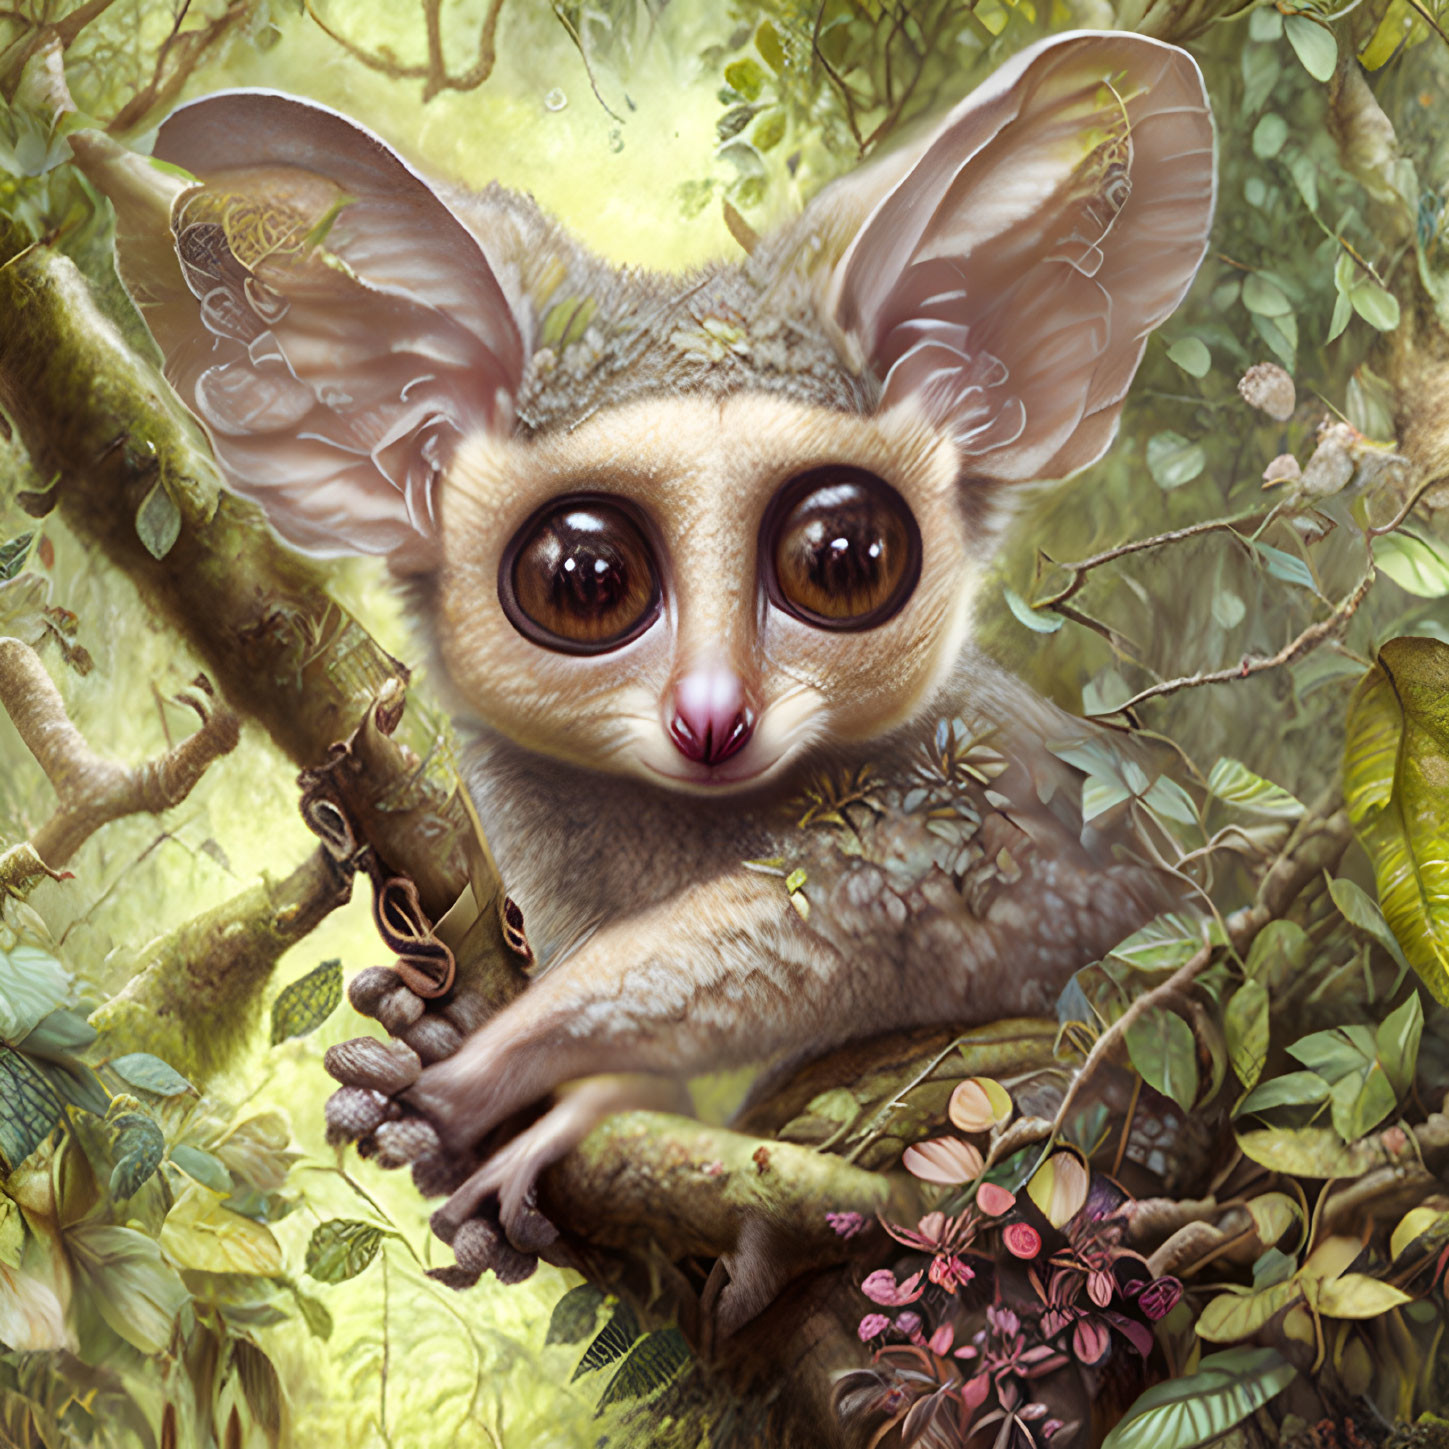 Whimsical creature with large eyes and oversized ears in lush greenery